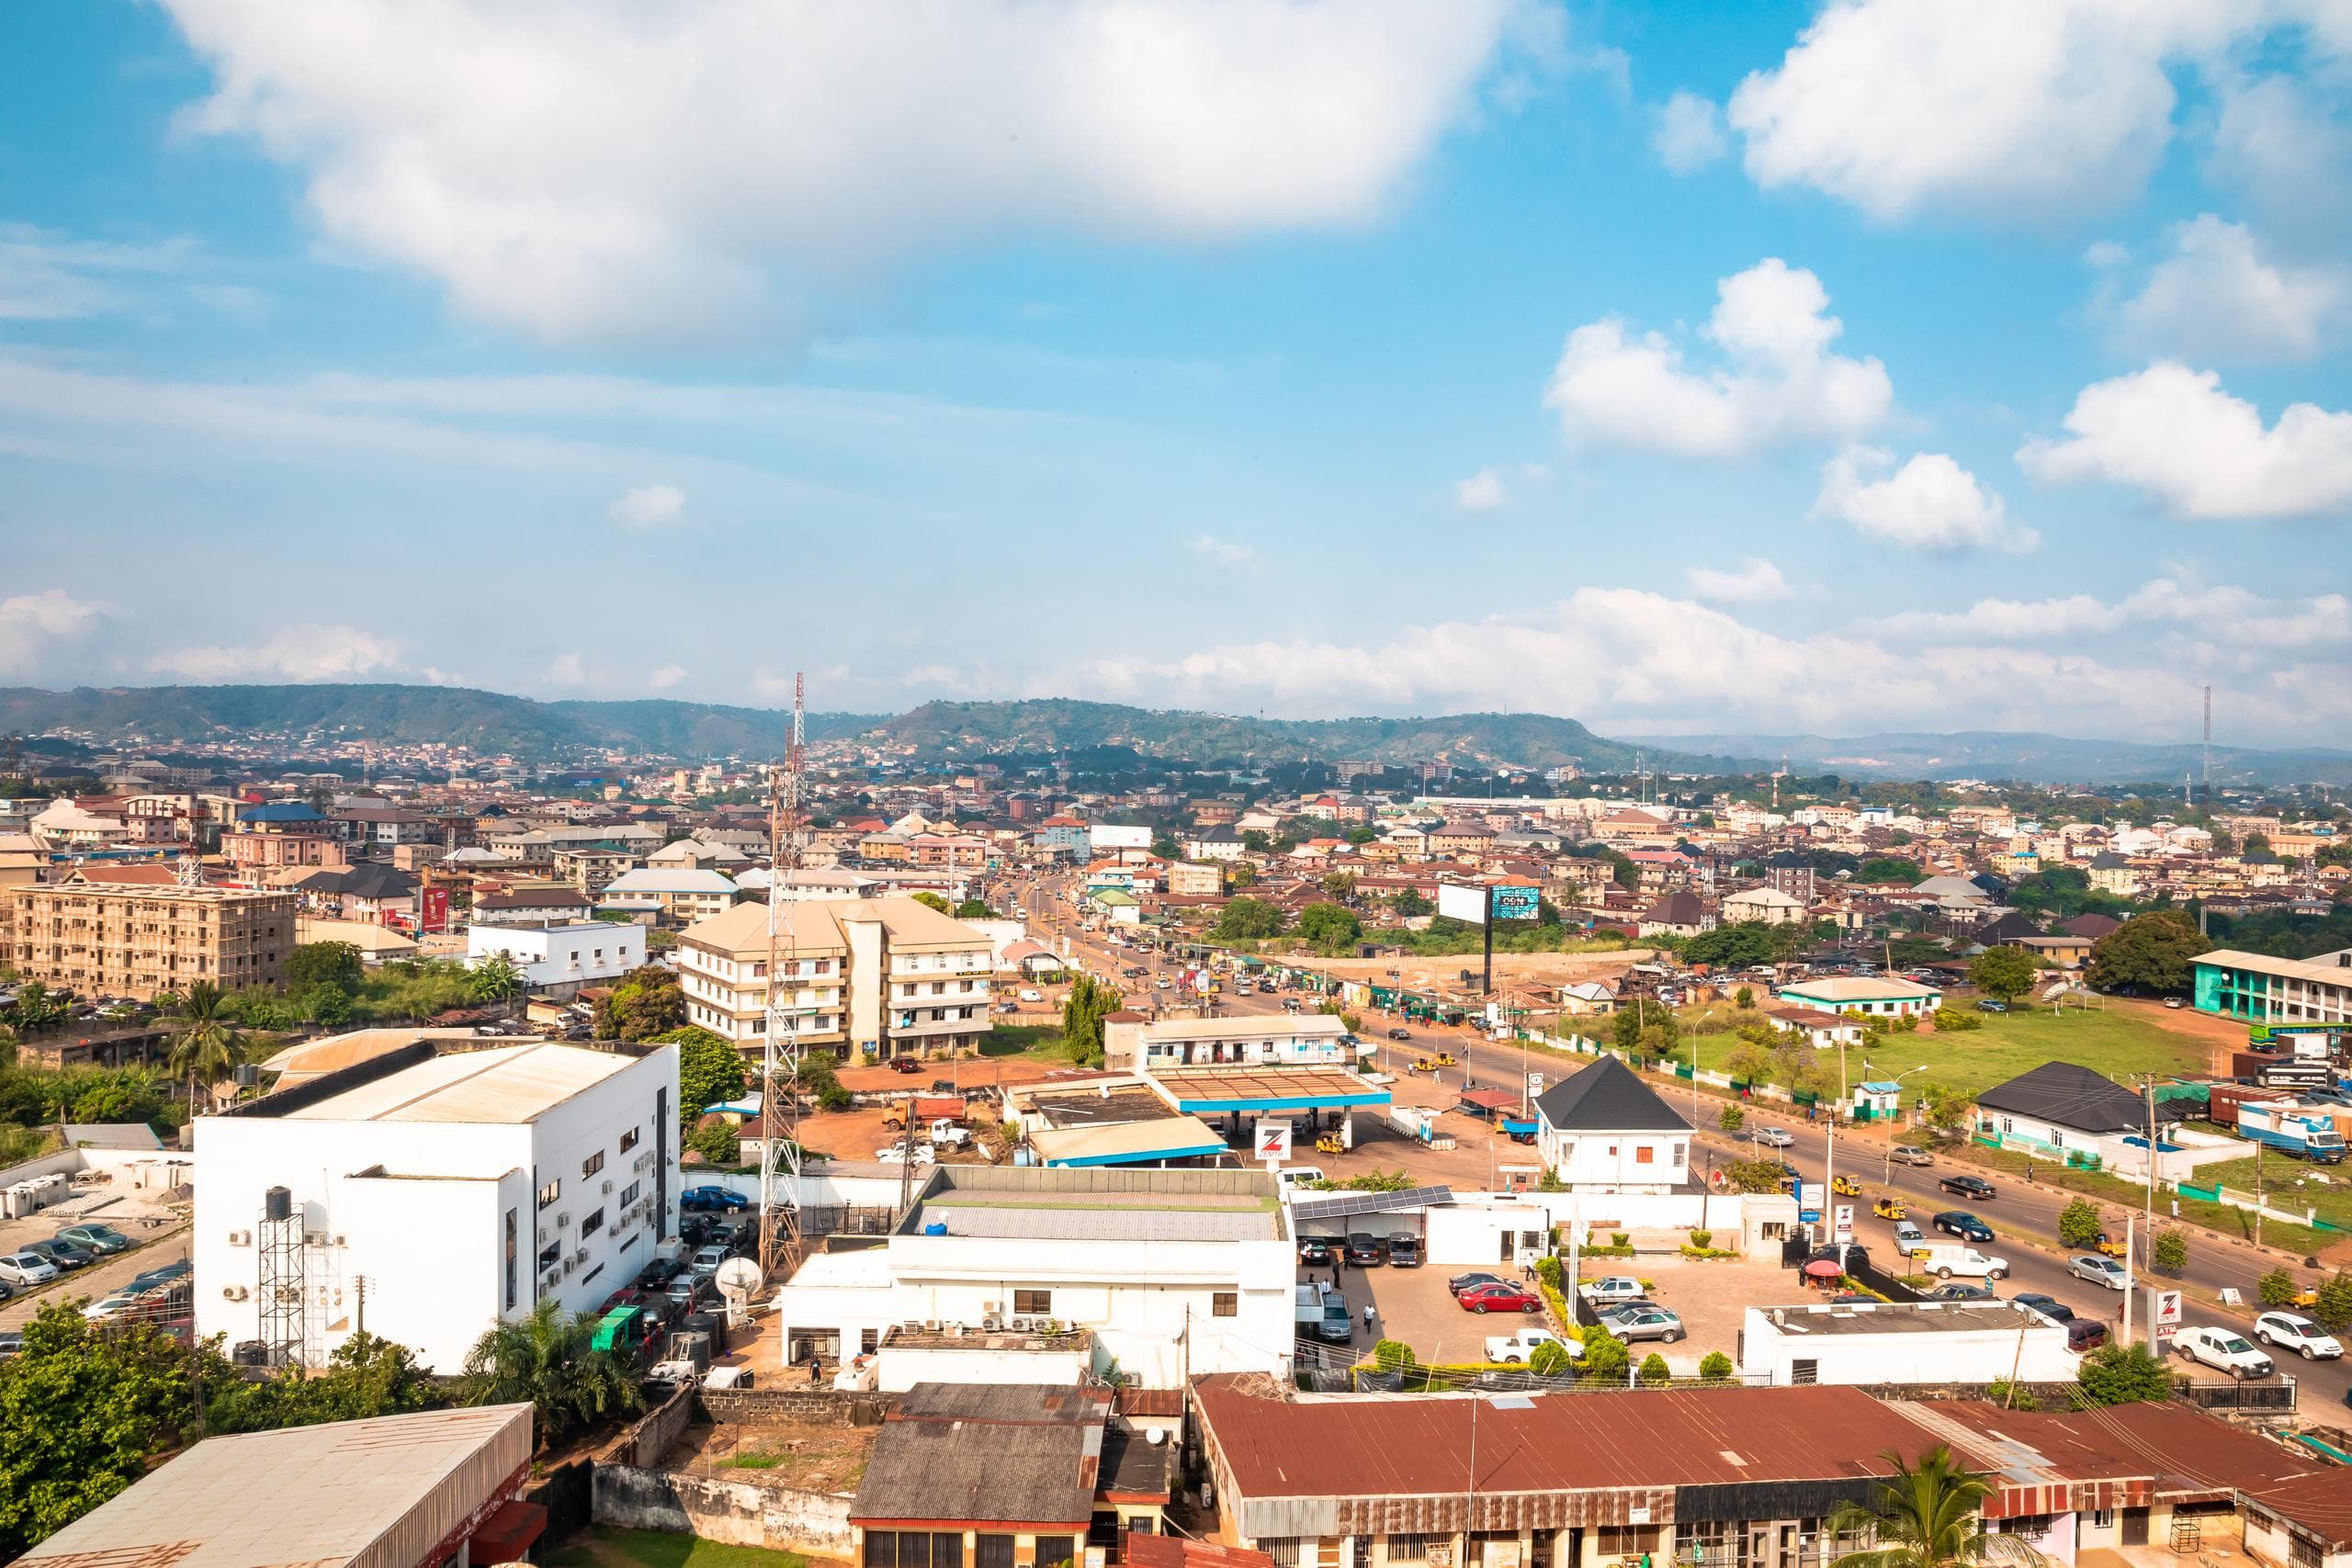 Aerial photography of houses and buildings in Enugu, Nigeria. Photo by Ovinuchi Ejiohuo on Unsplash